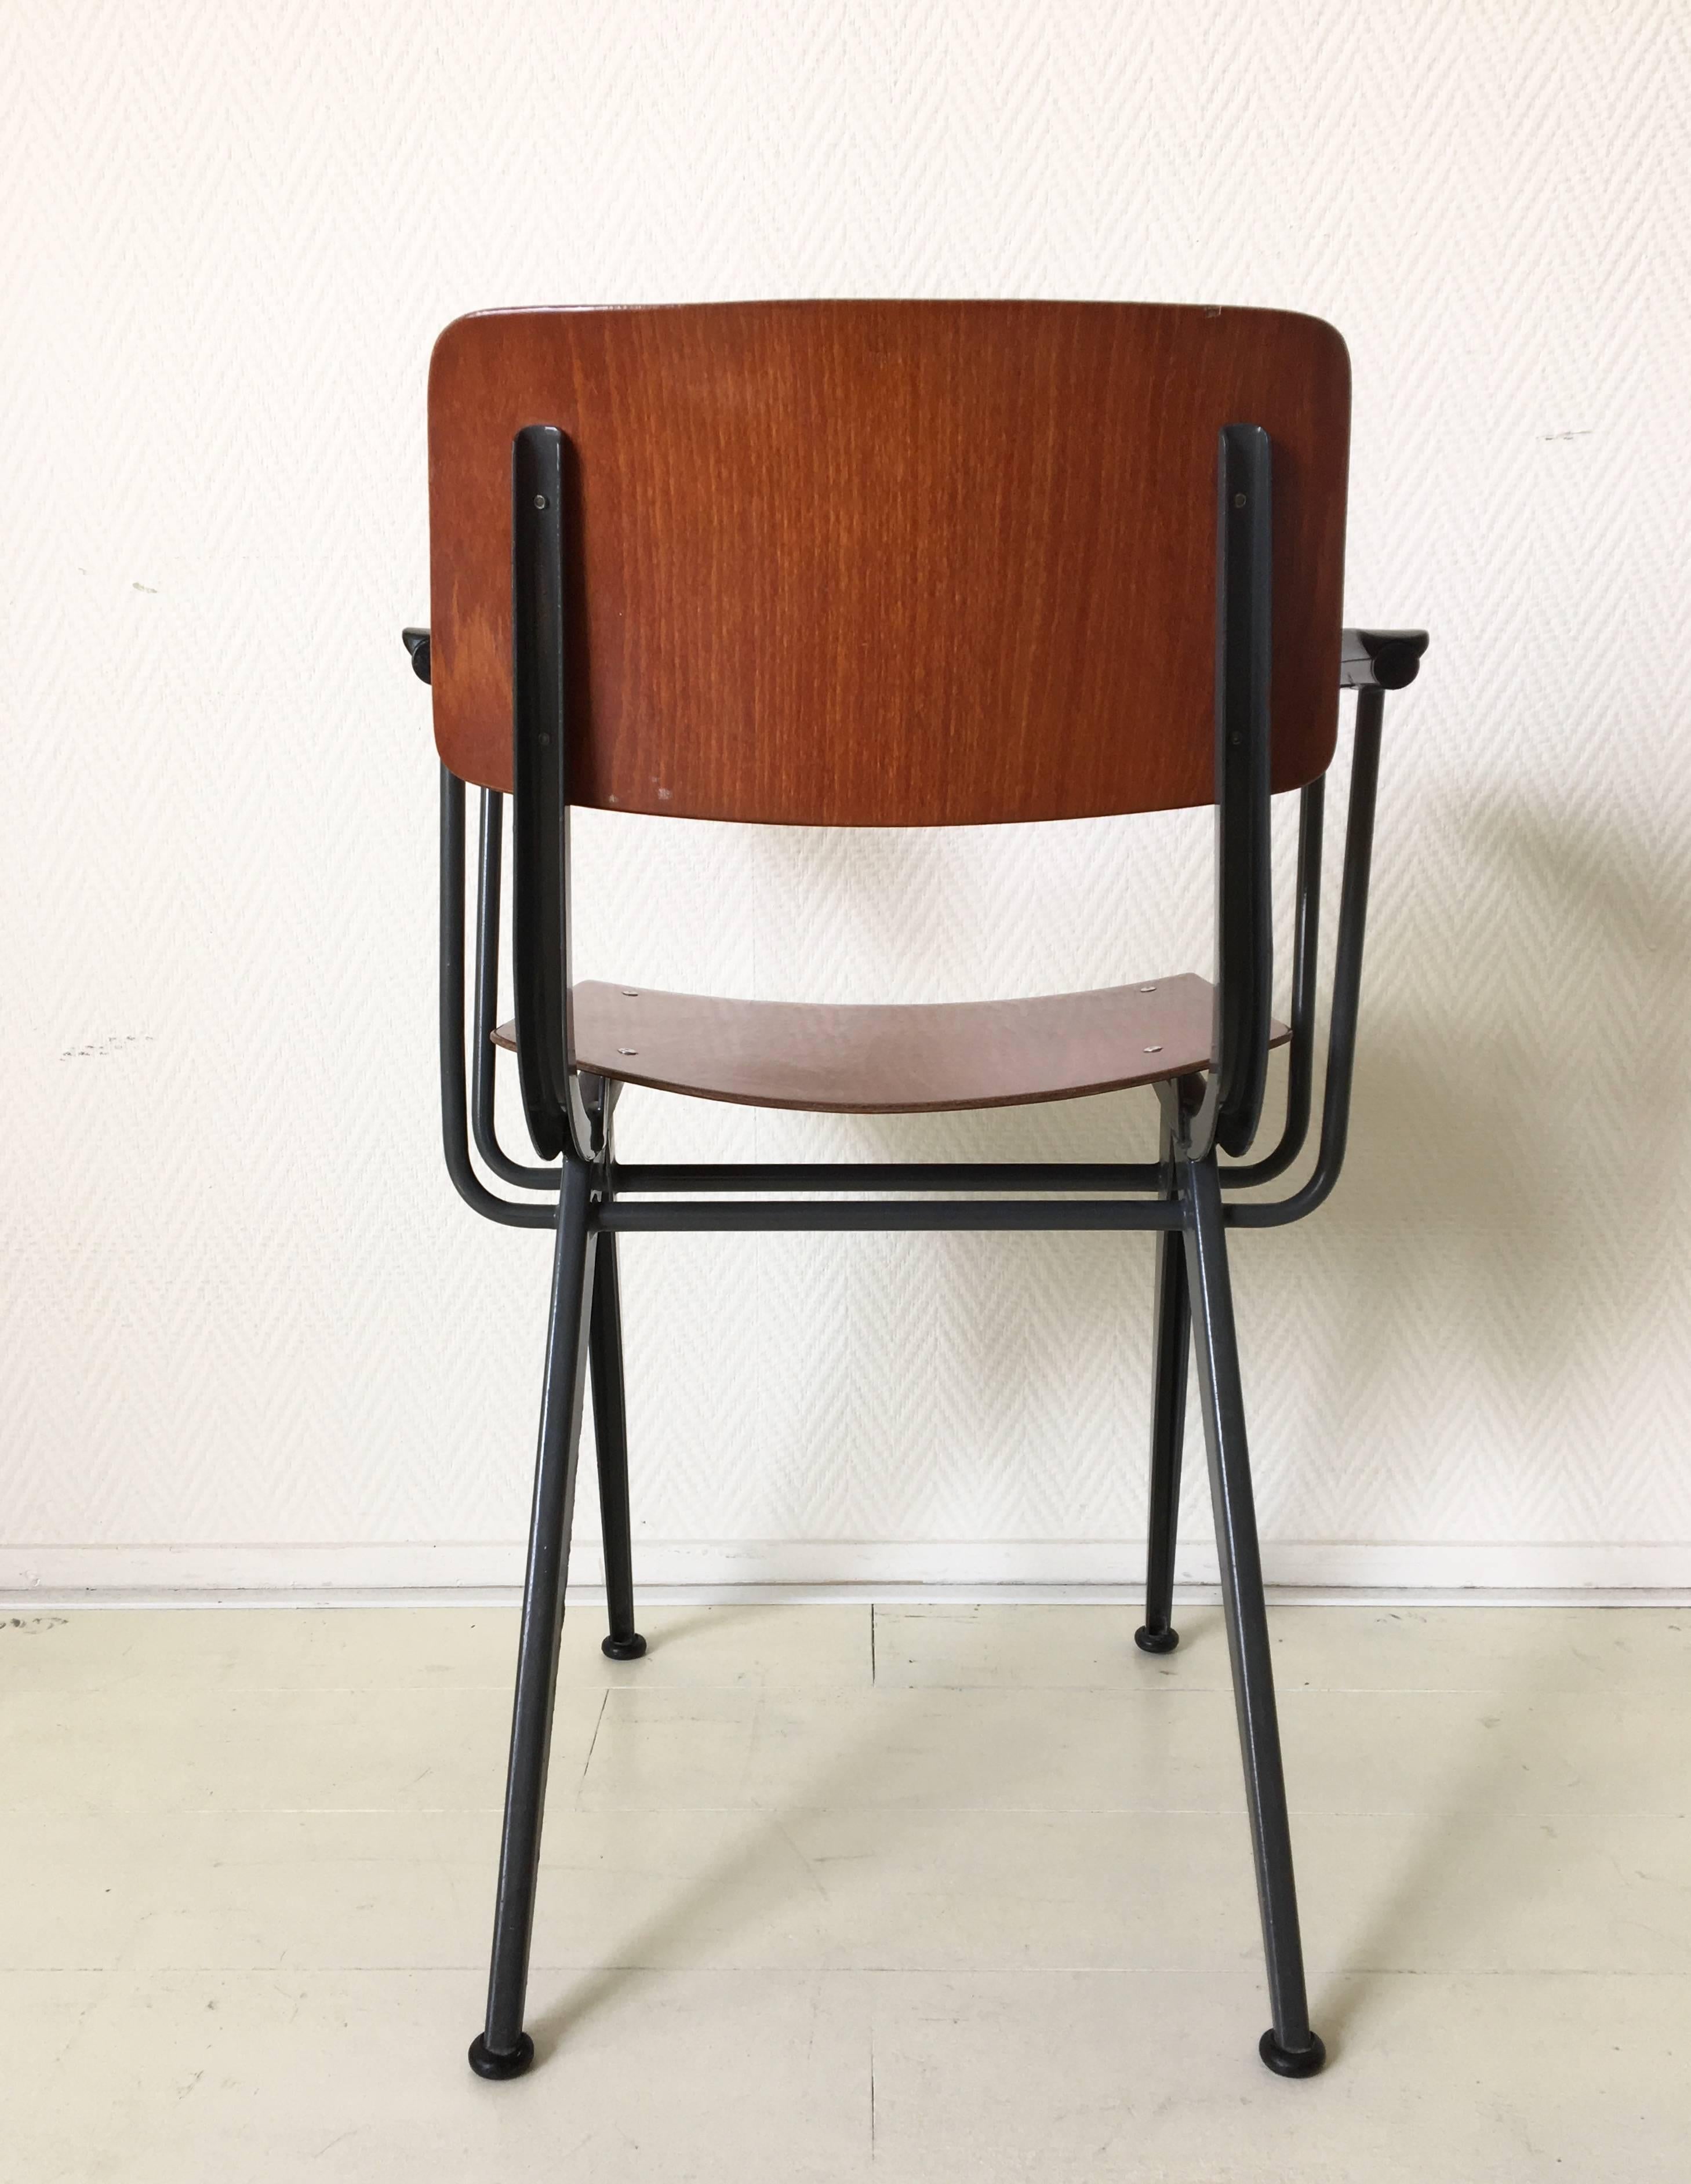 20th Century Midcentury Prouvé Inspired Industrial Armchair Attributed to Friso Kramer For Sale